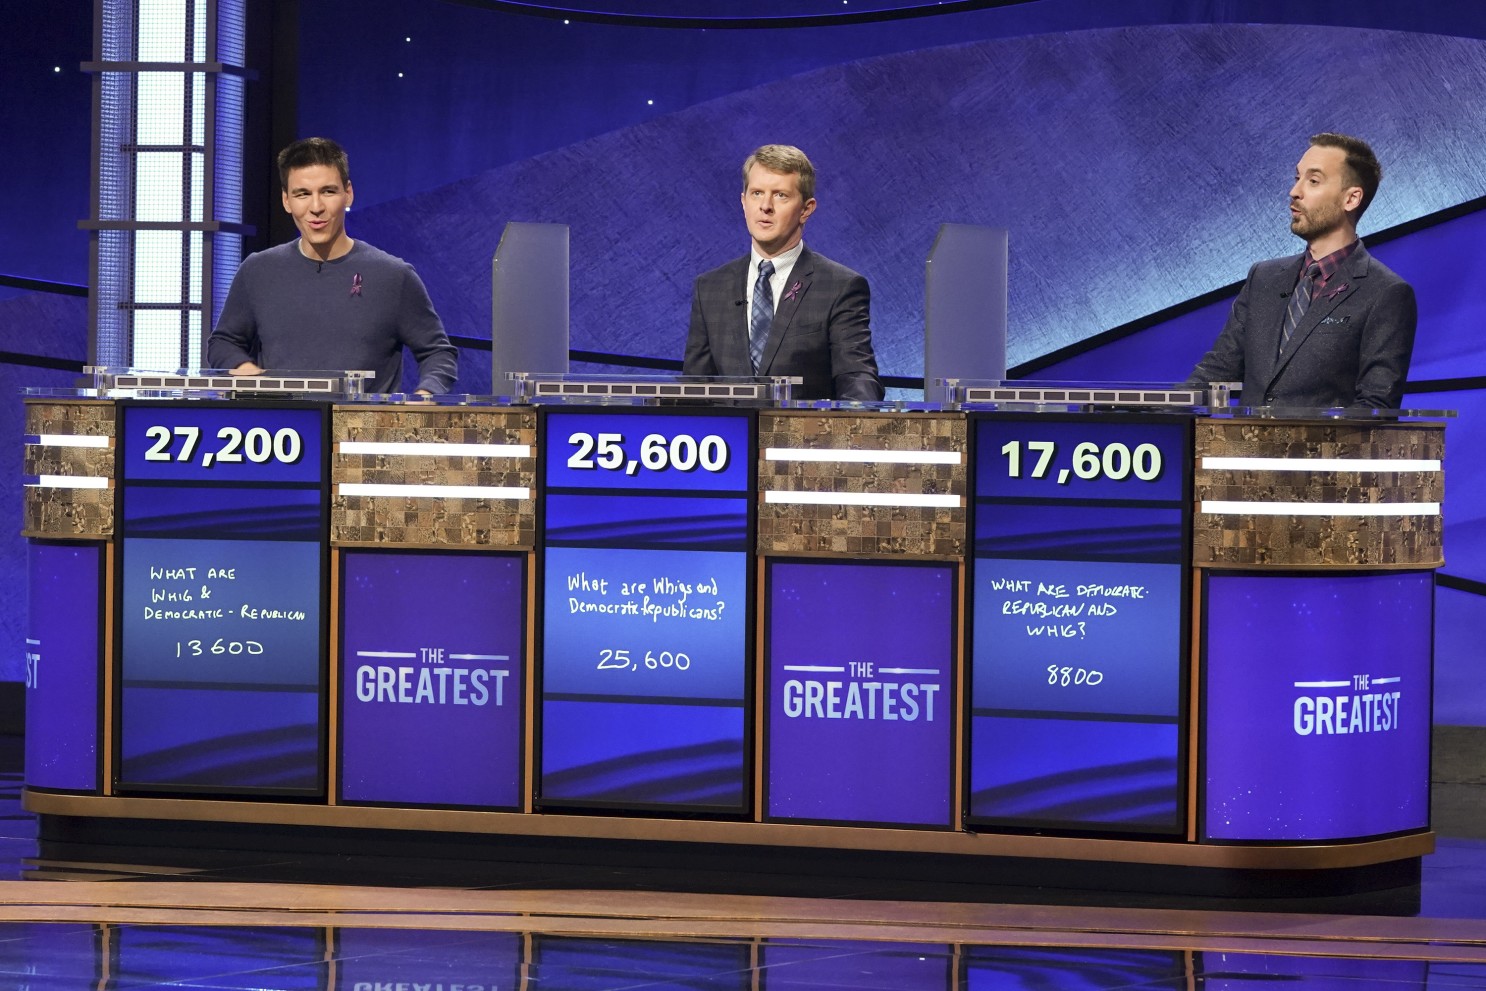 These Strange Questions Were Actually Asked on “Jeopardy!” — Can You Get 12/15? Jeopardy